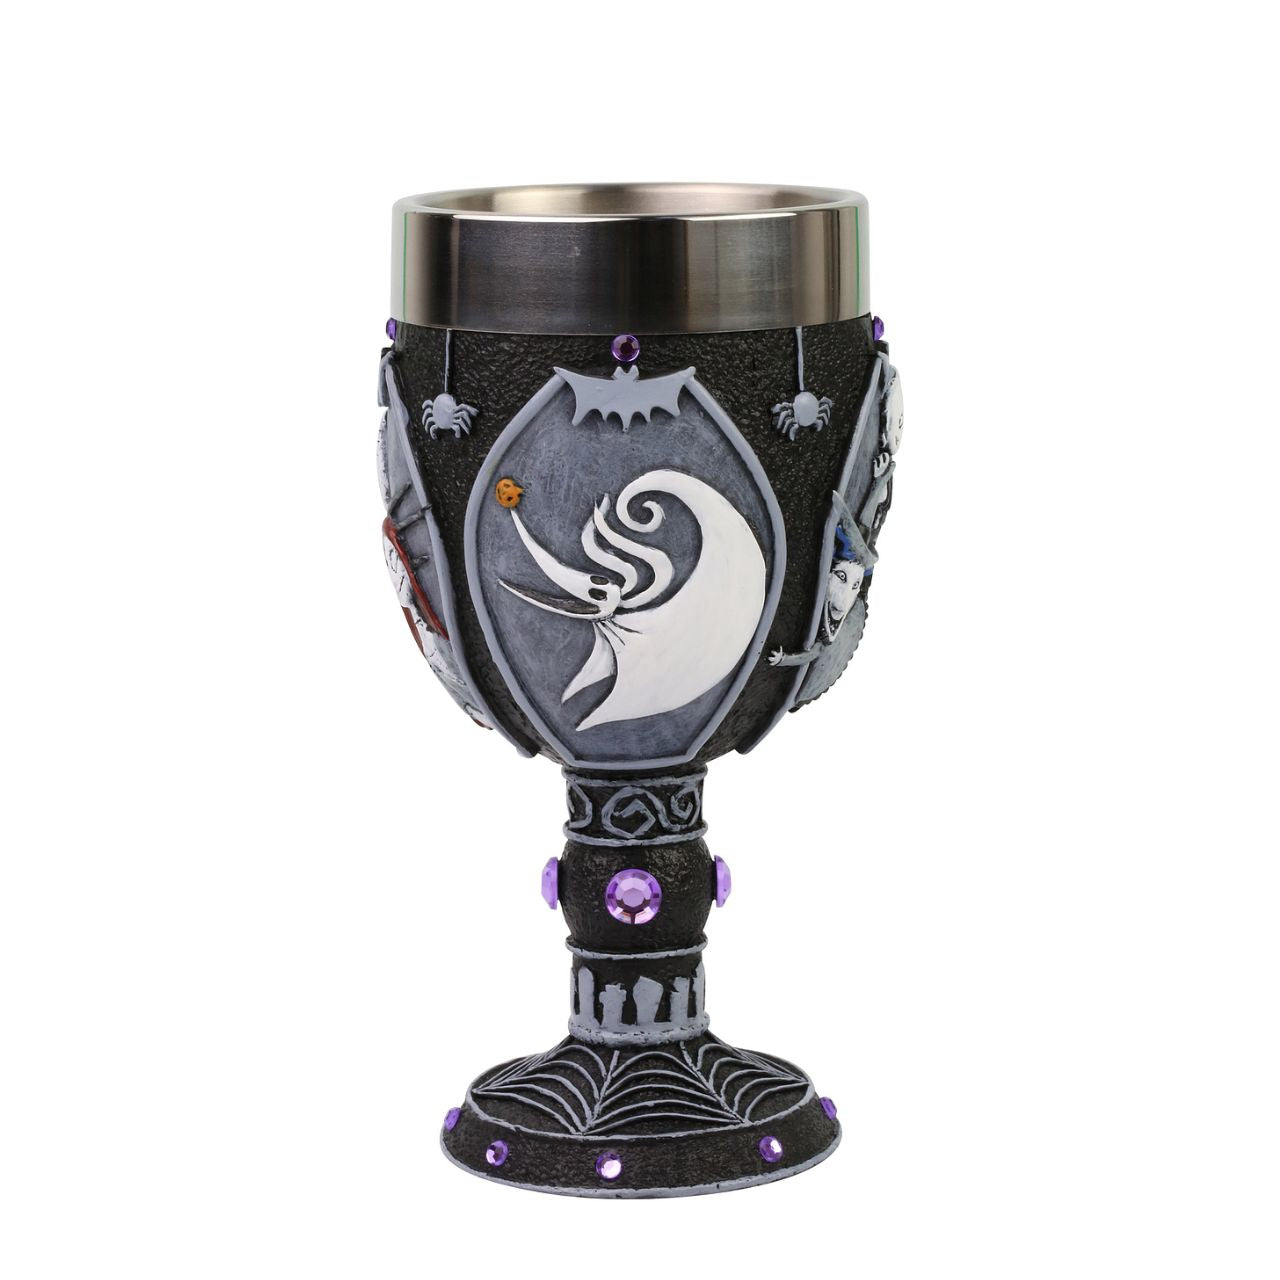 Nightmare Before Christmas Decorative Goblet  The official chalice of Halloween Town, celebrate your holidays in style with this stainless steel lined decorative goblet adorned with frightful imagery from The Nightmare Before Christmas.